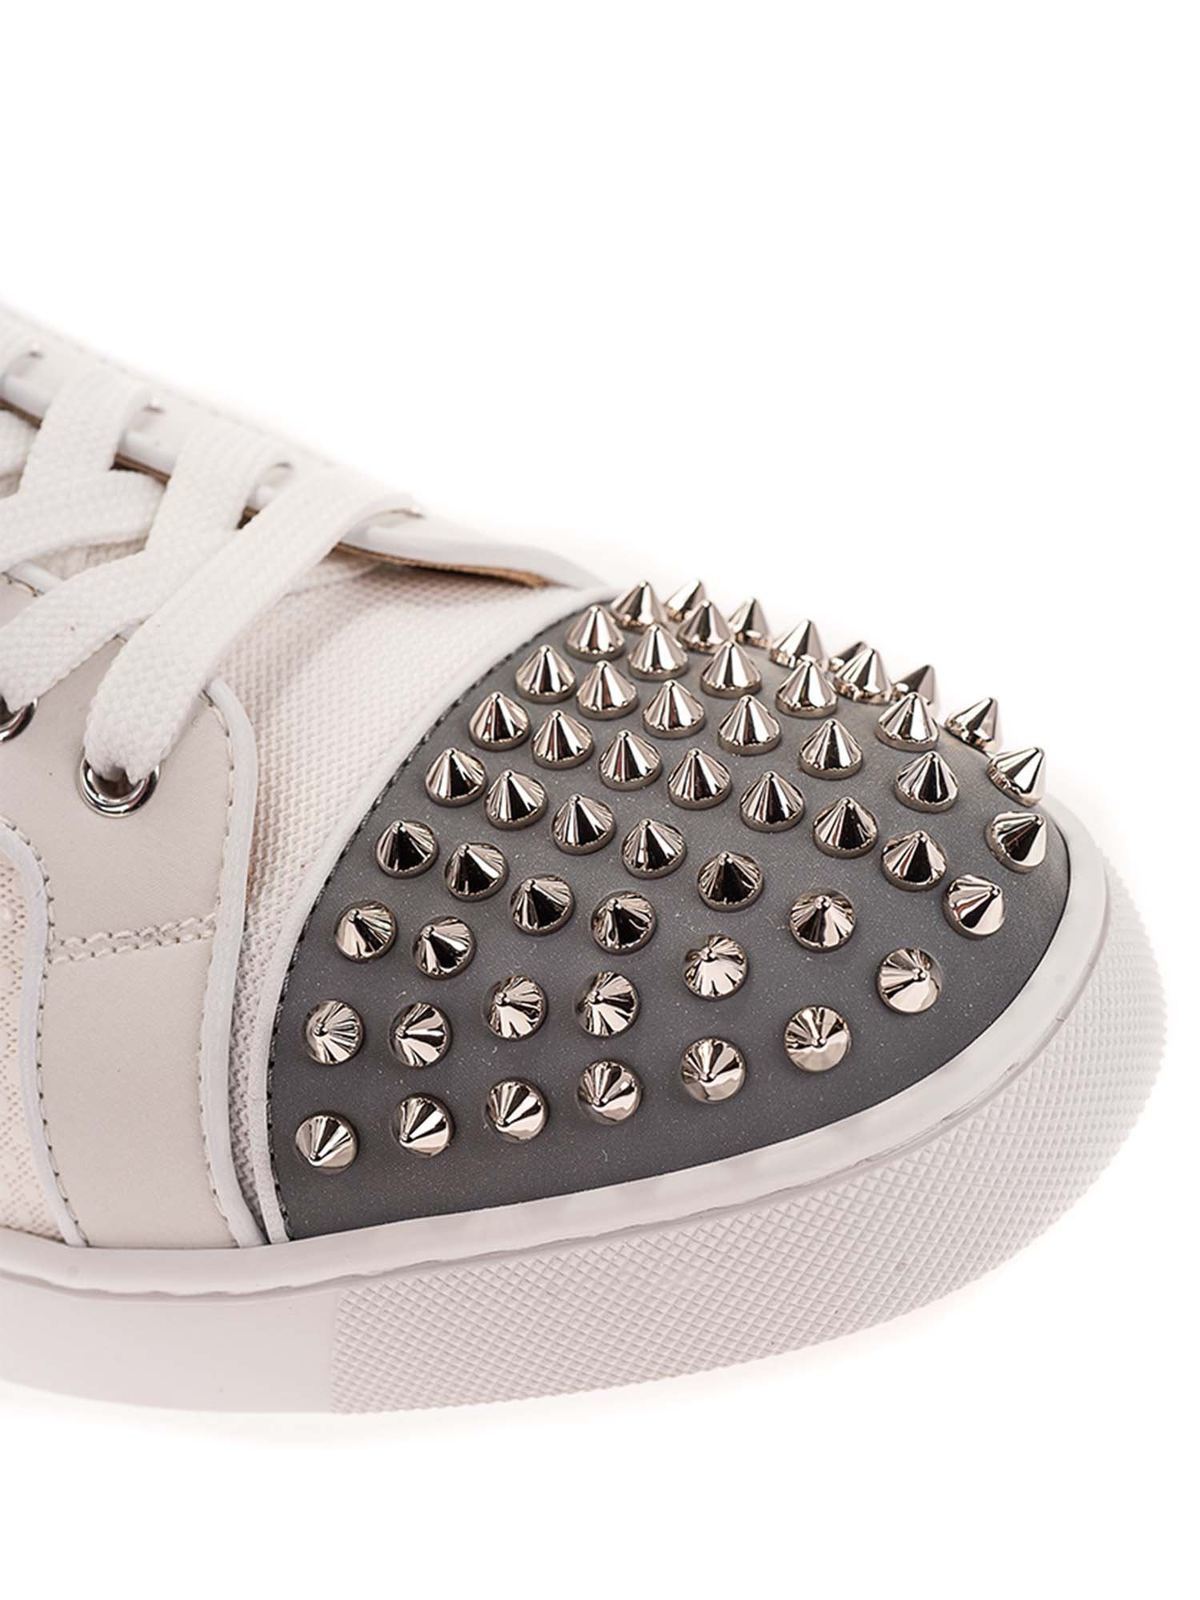 Trainers Christian Louboutin - Louis Orlato Spikes sneakers in